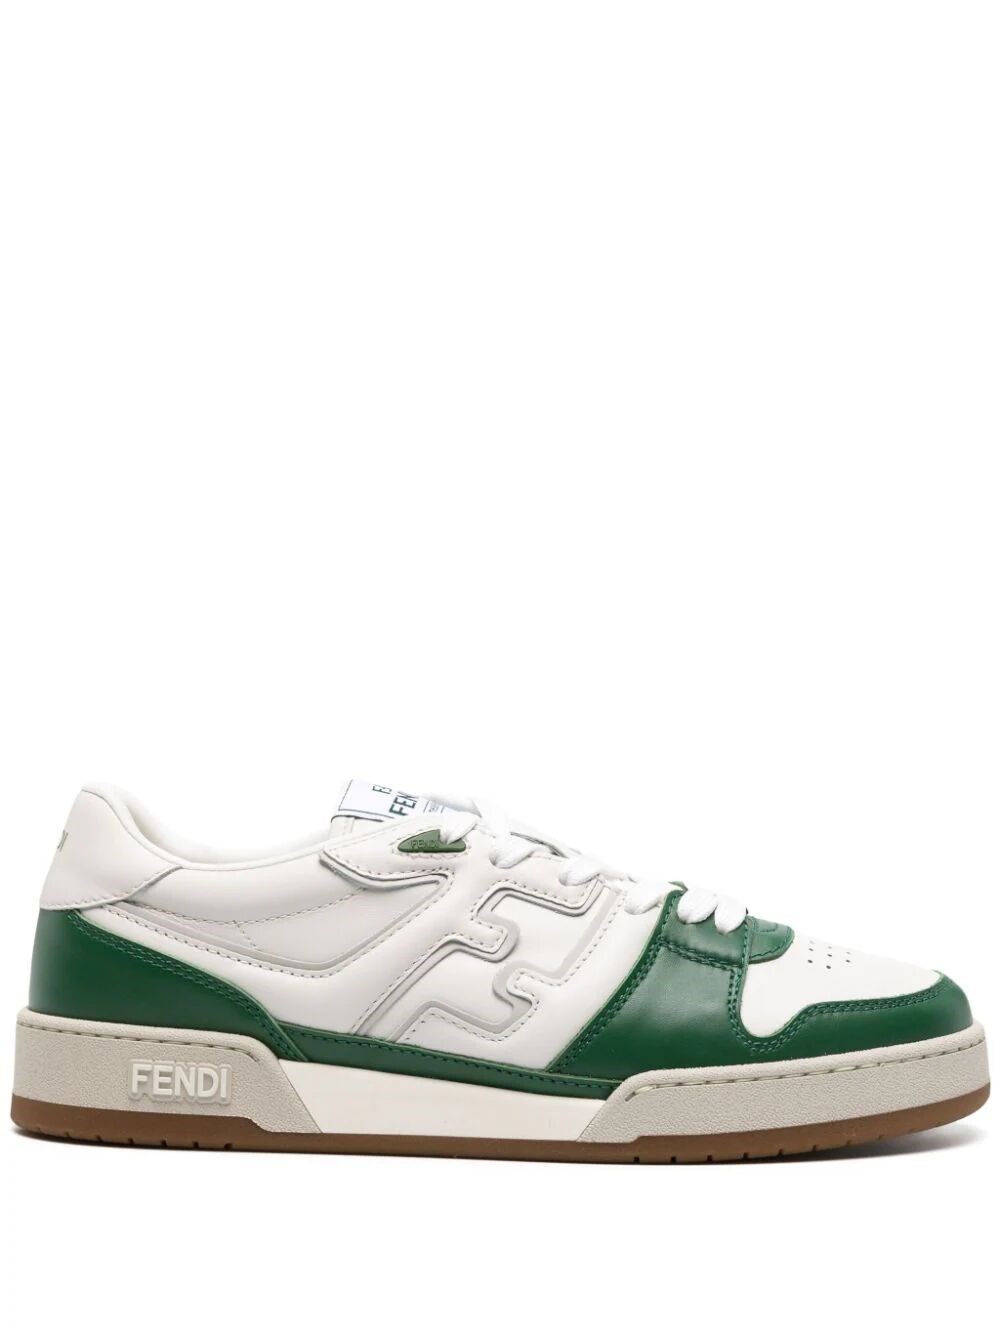 Shop Fendi Match Leather Sneakers In White